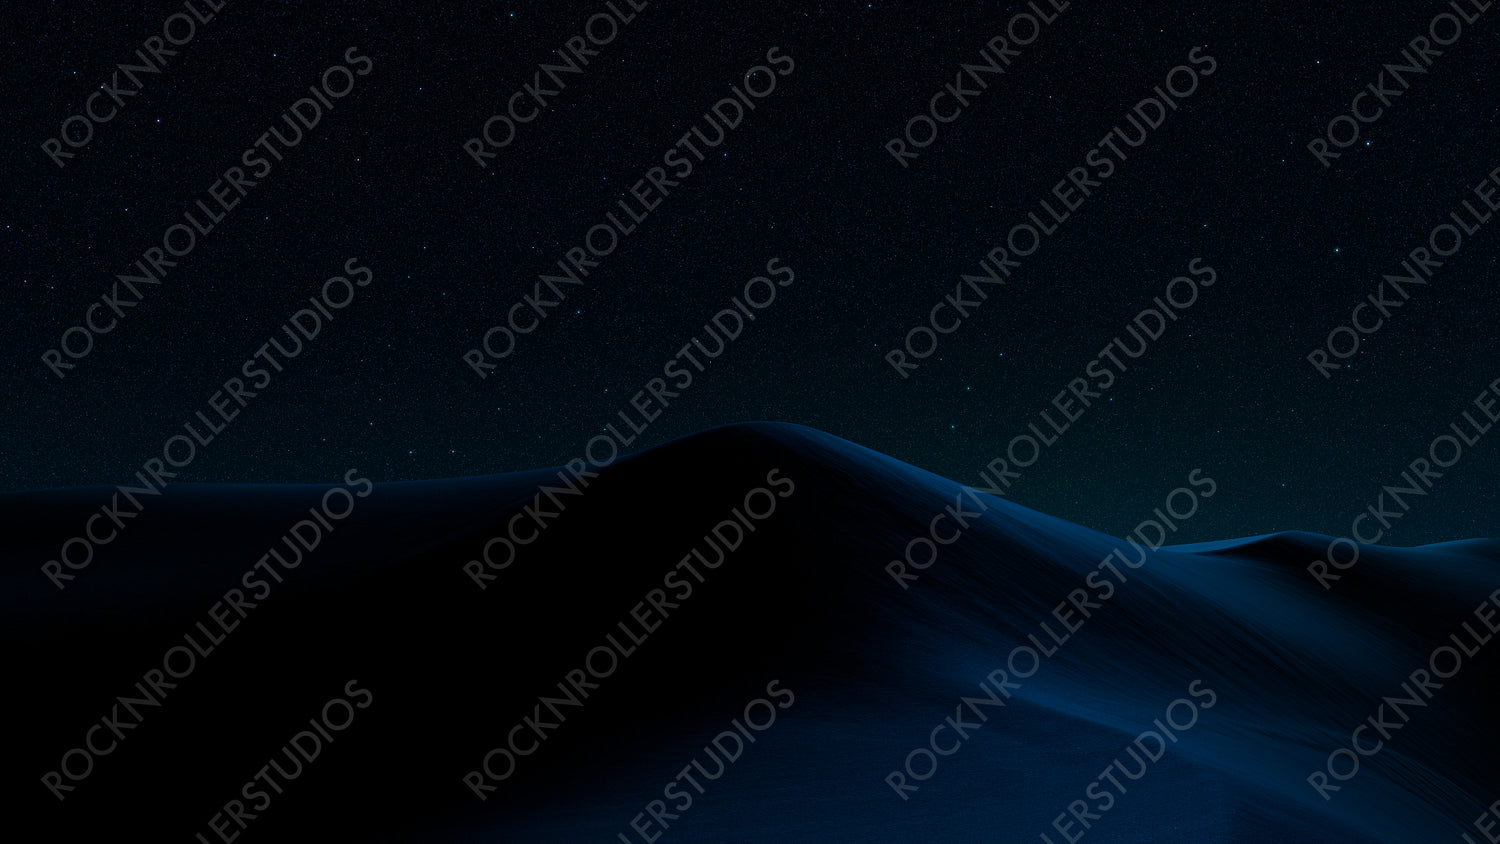 Desert Landscape with Sand Dunes and Navy Gradient Starry Sky. Peaceful Modern Background.